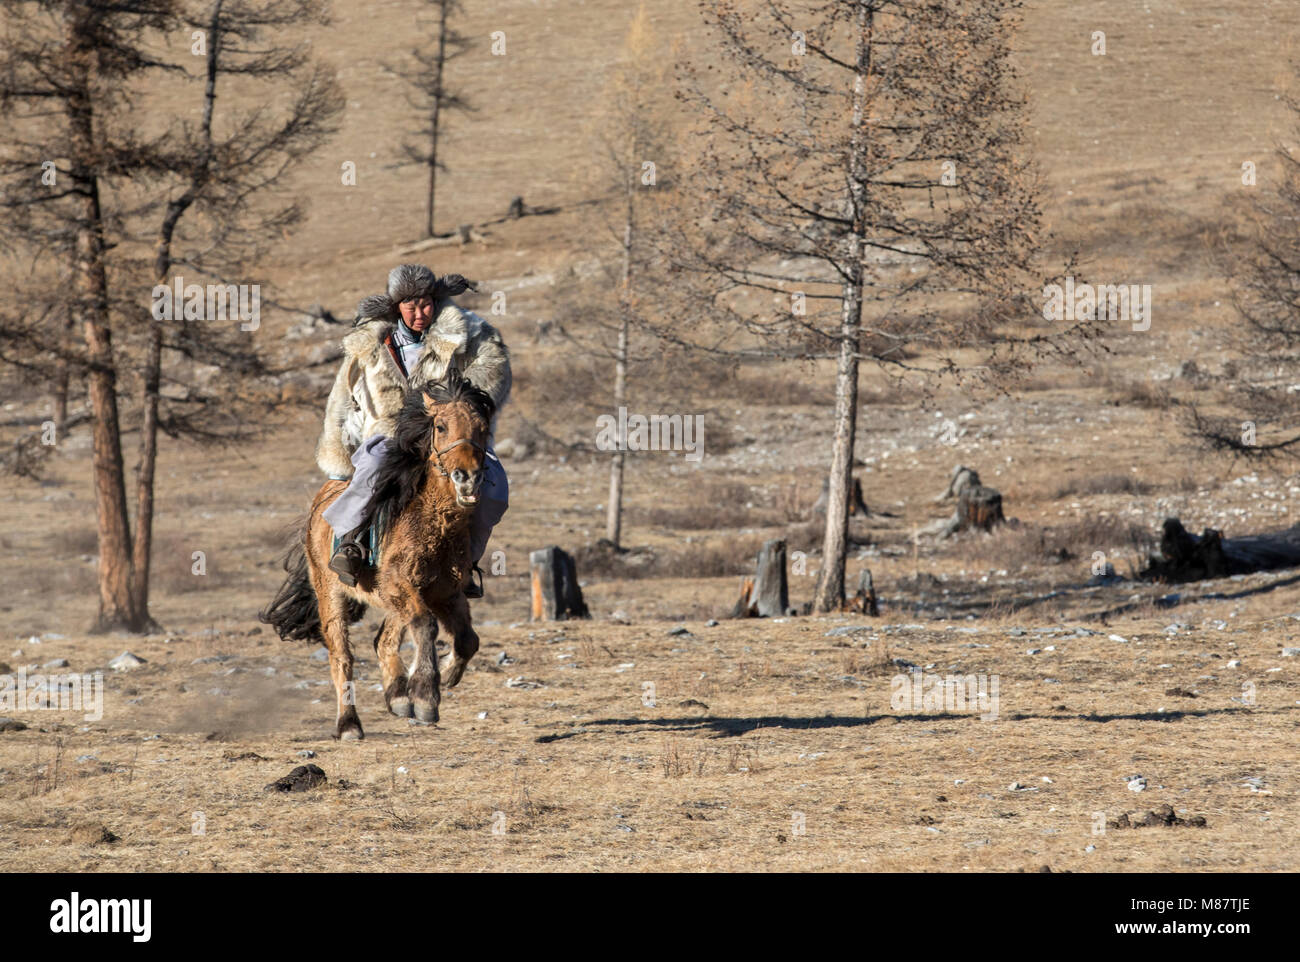 mongolian man wearing a wolf skin jacket, riding his horse in a steppe in Northern Mongolia Stock Photo